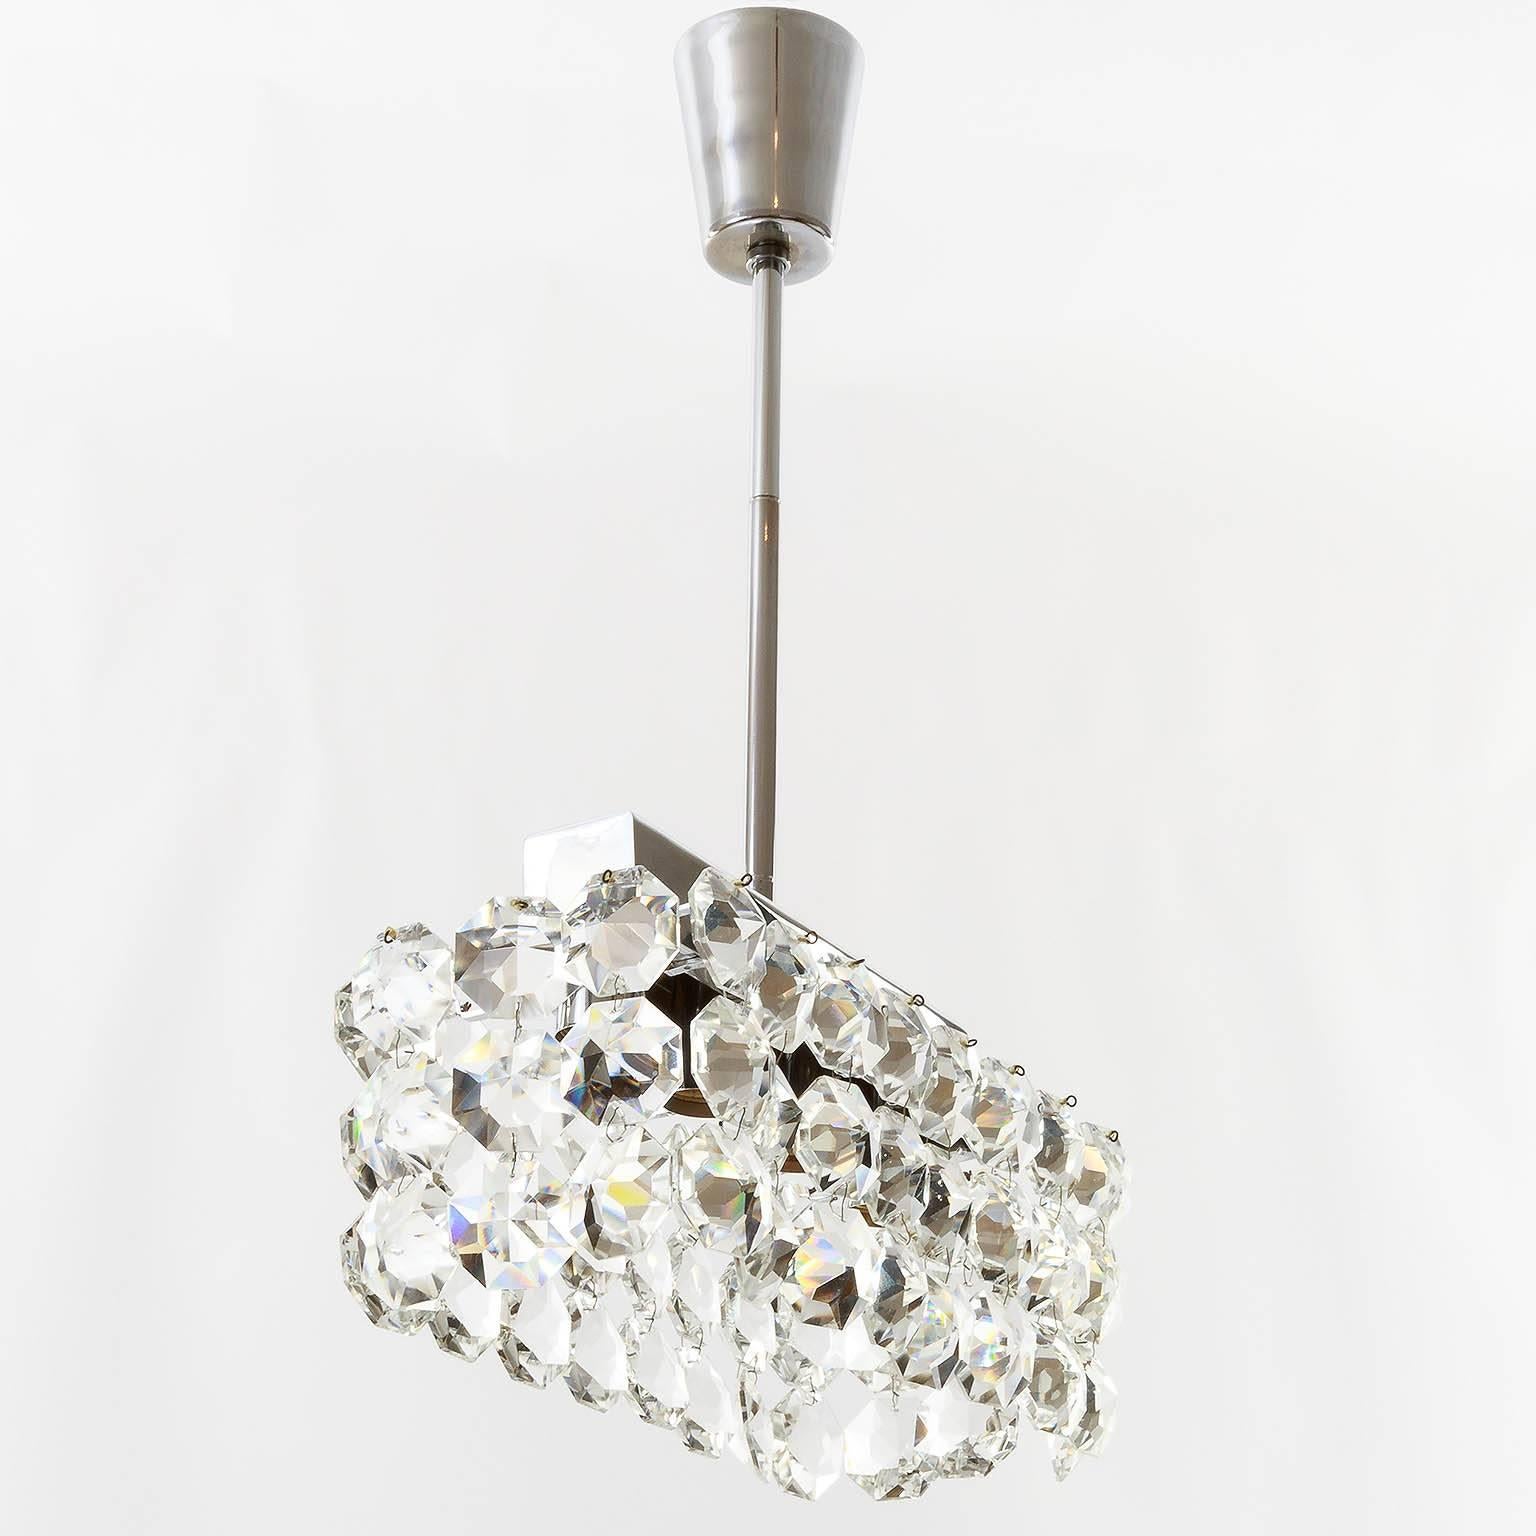 A beautiful and rare rectangular shaped chandelier by Bakalowits & Soehne, Vienna, Austria, manufactured in Mid-Century, circa 1960 (late 1950s or early 1960s). A high quality and handmade light. The fixture is made of a nickel-plated brass frame